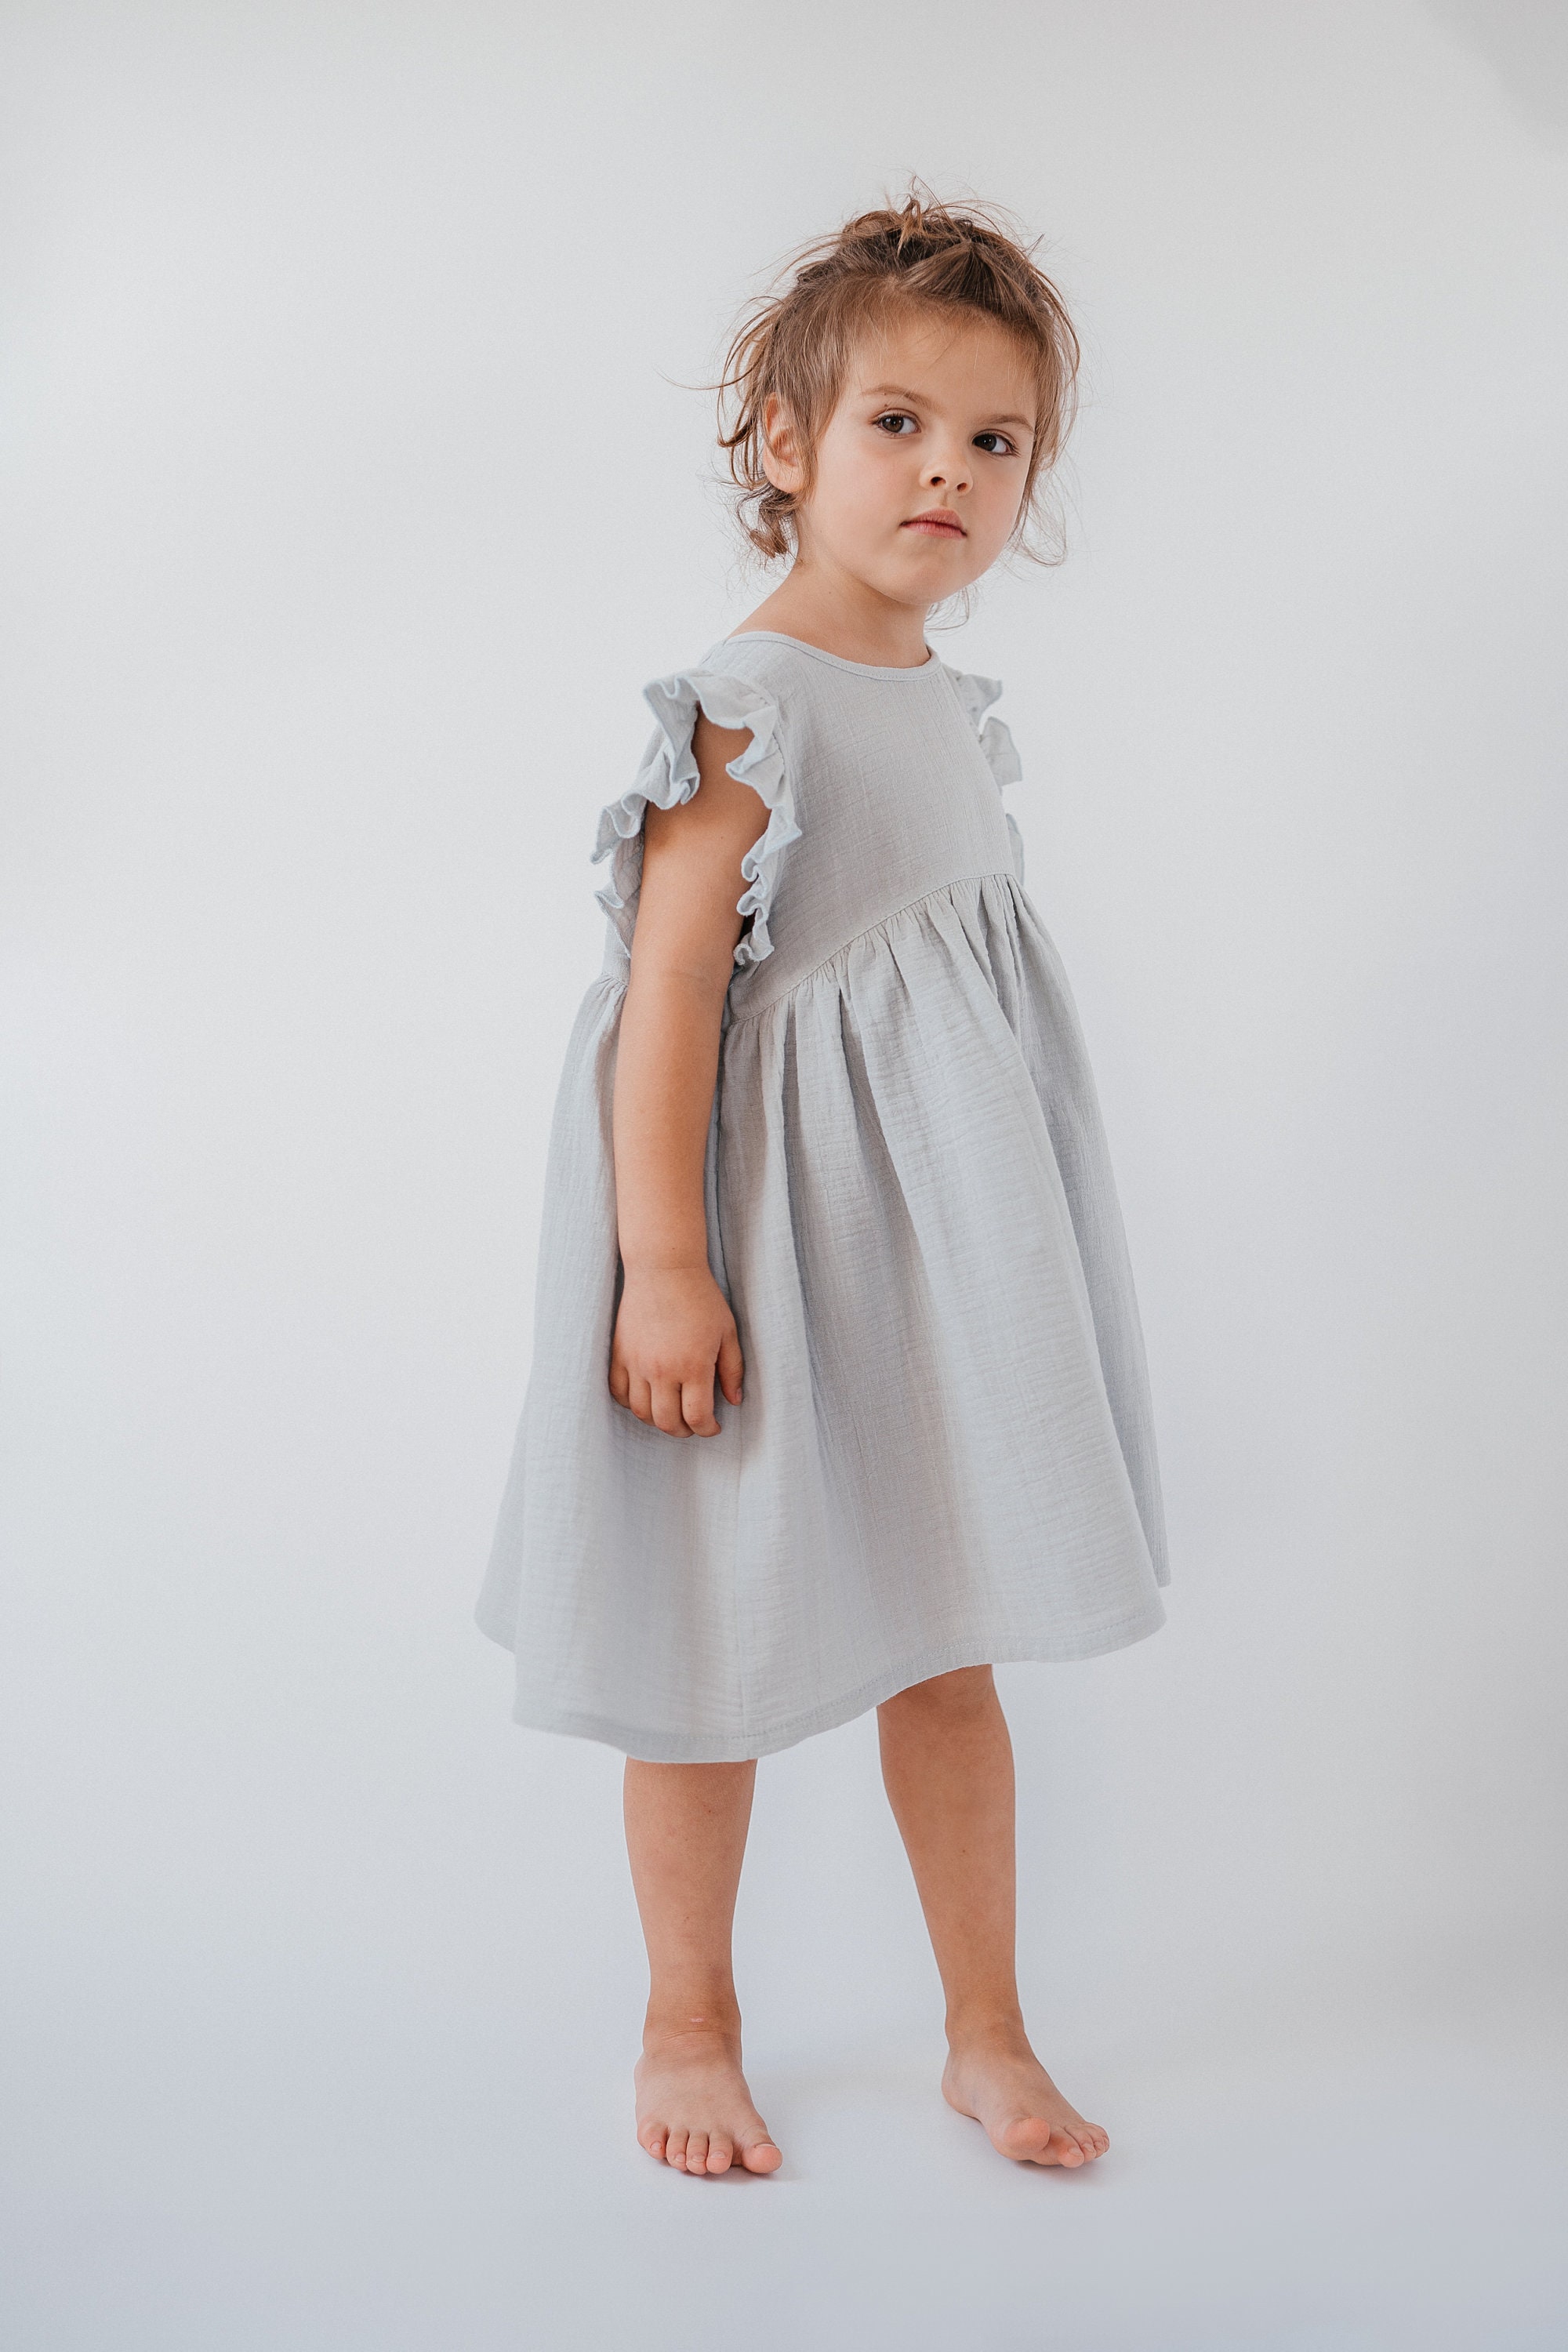 Grey children's summer dress double layered muslin with | Etsy